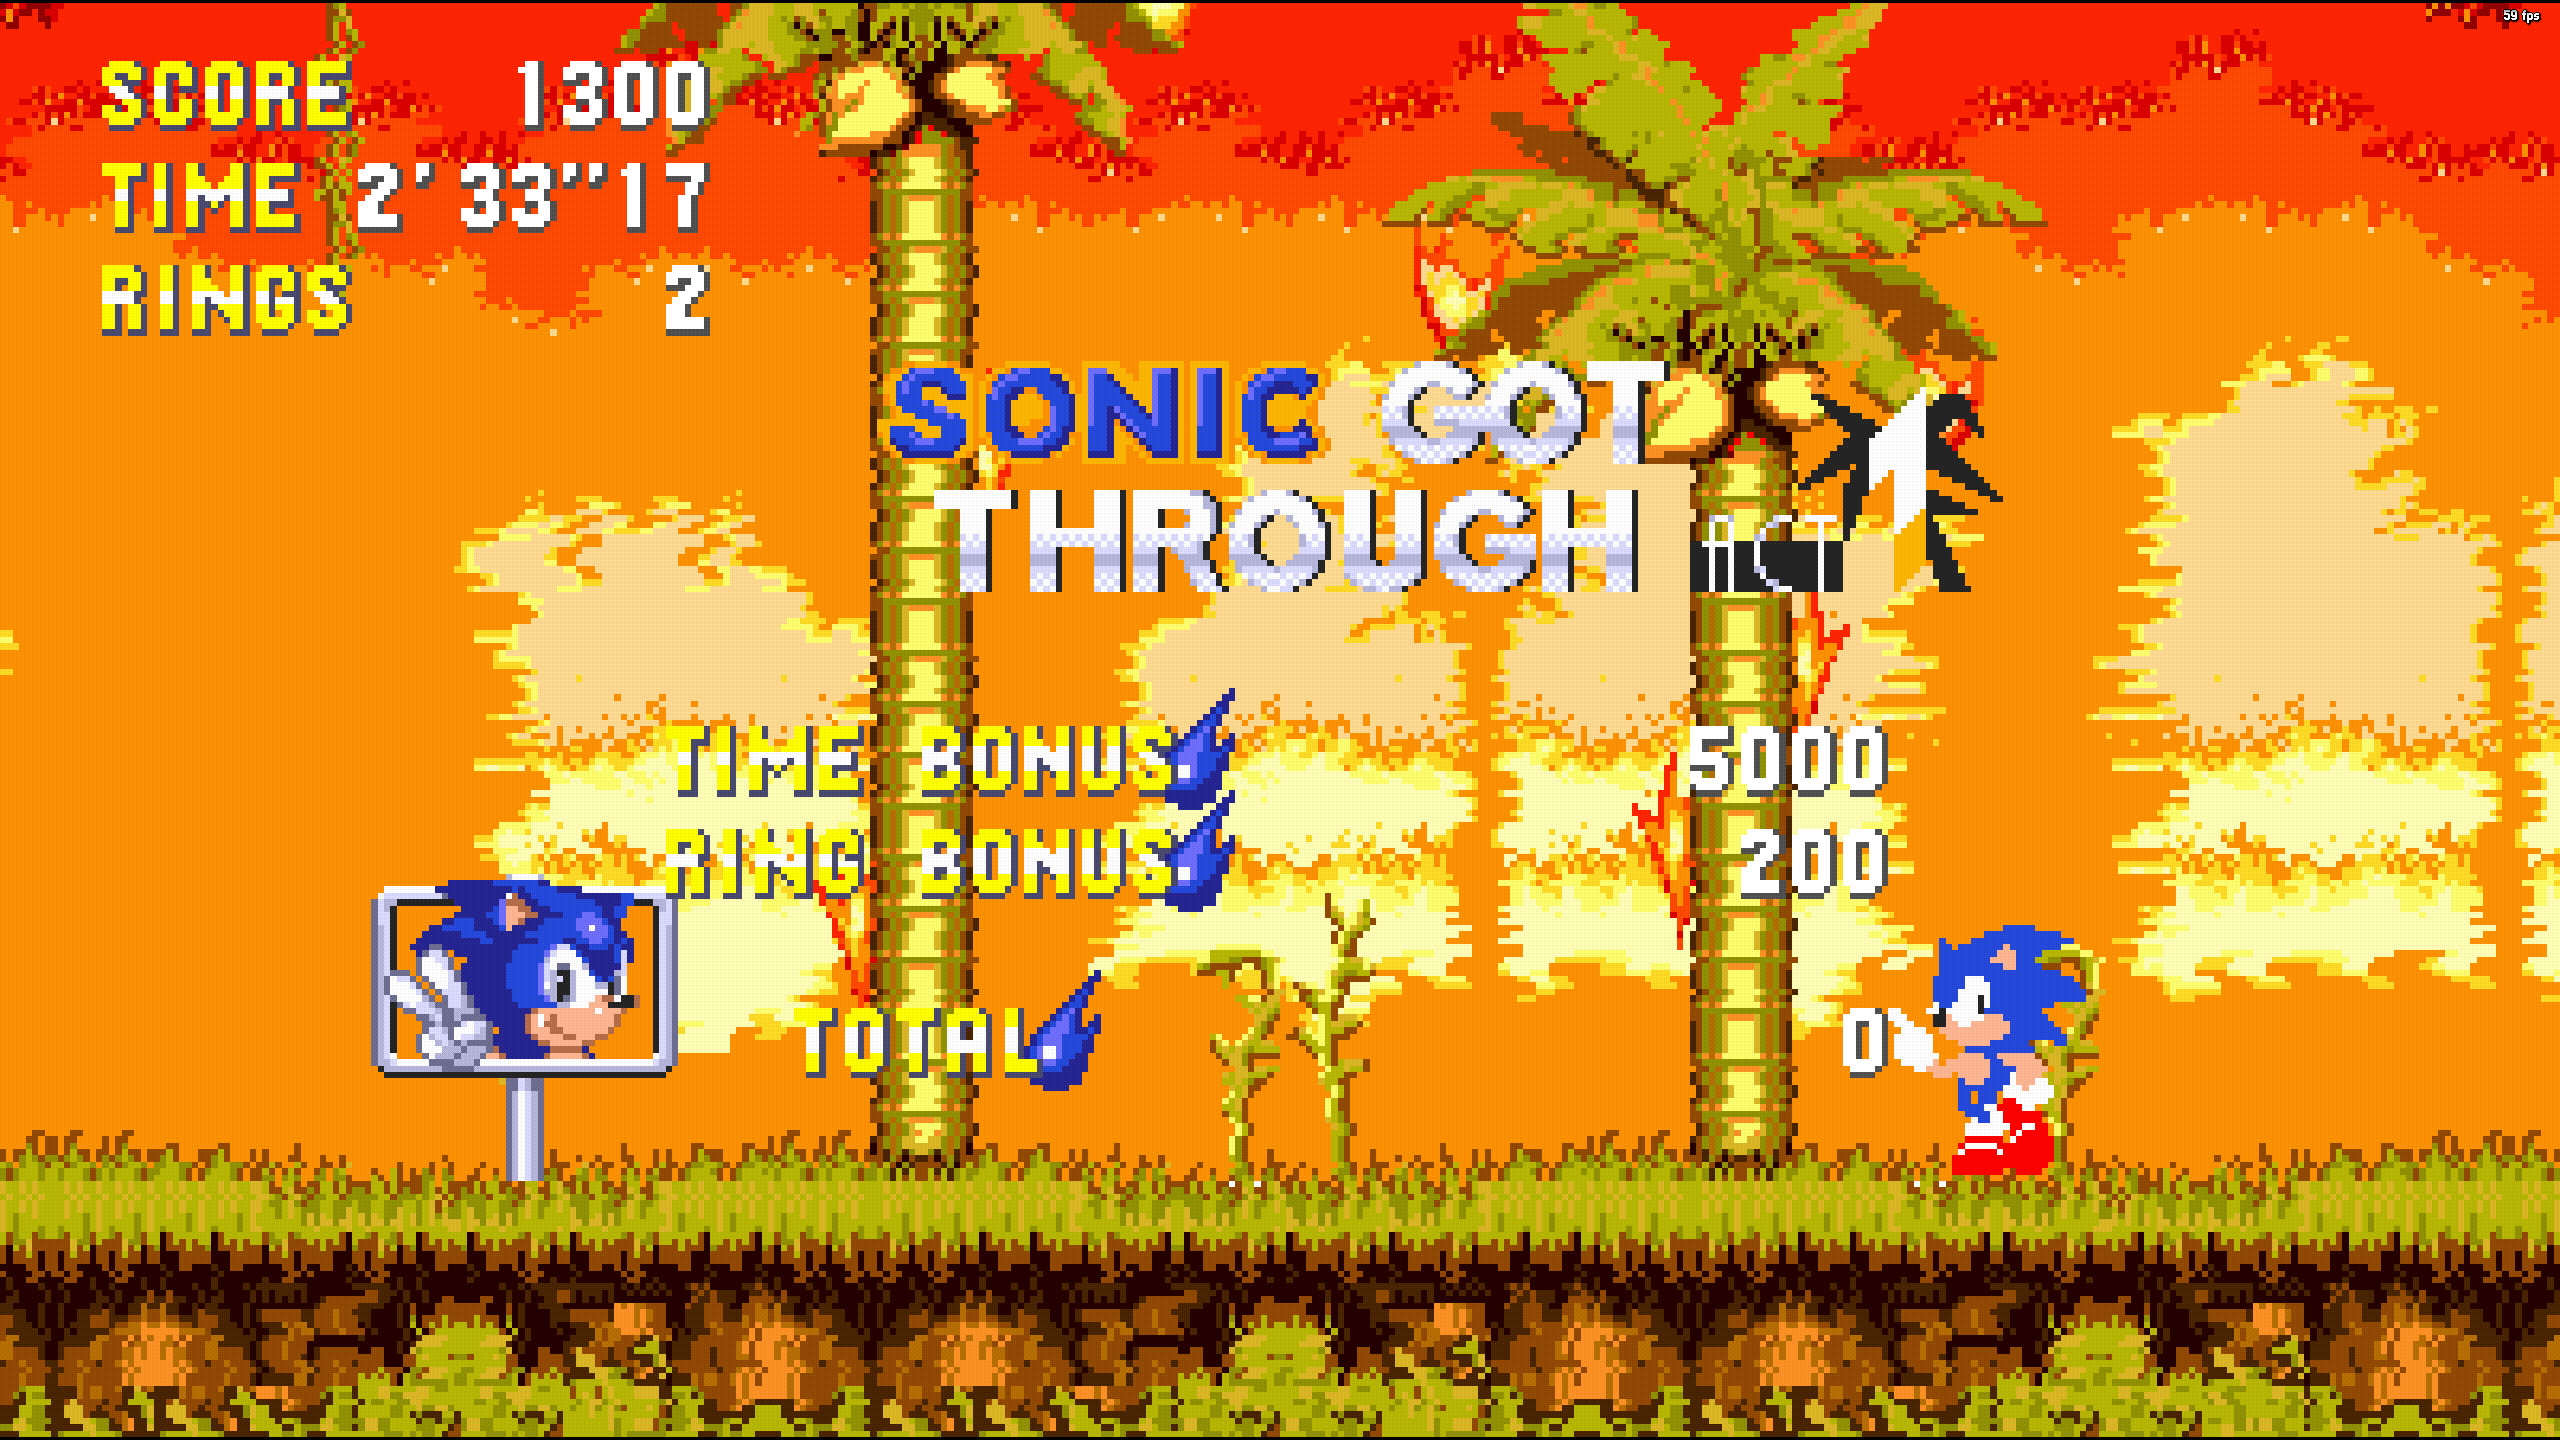 Sonic 3 air exe. Sonic 3 Air. Sonic 3 a.i.r. (Angel Island revisited). Sonic 3 Air Mods. Моды на Соник 3 a.i.r.